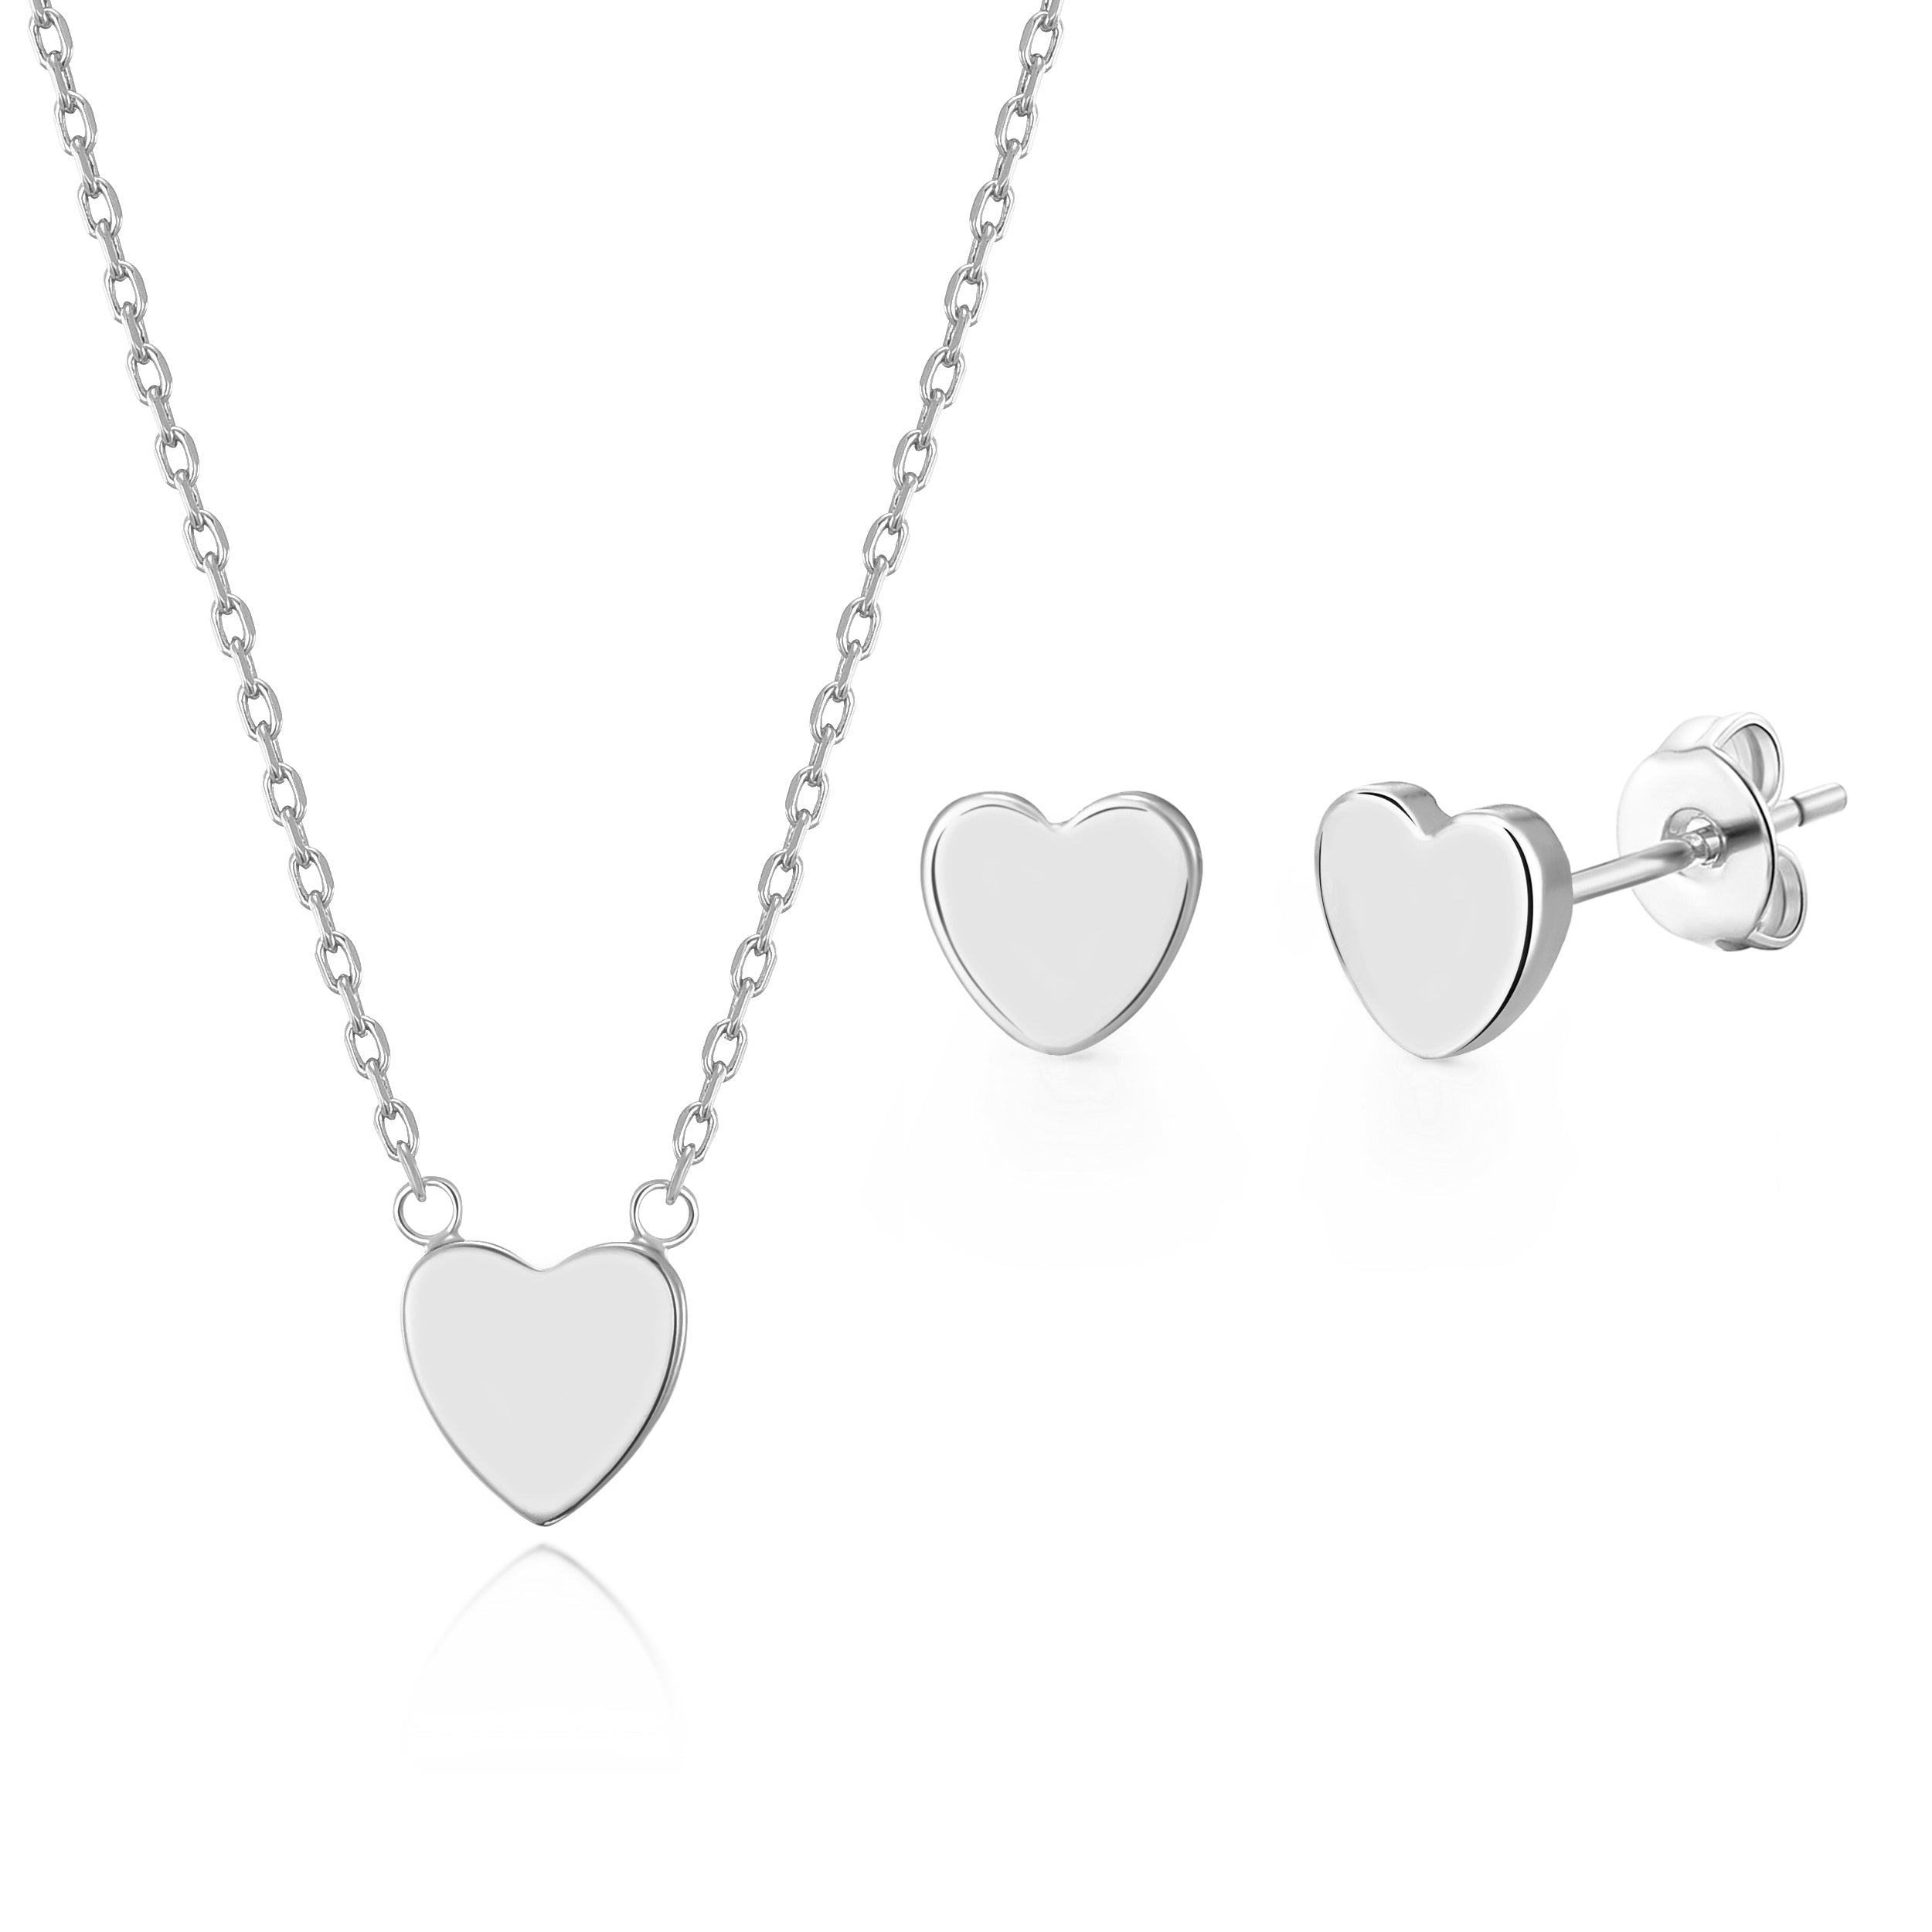 Silver Plated Heart Set